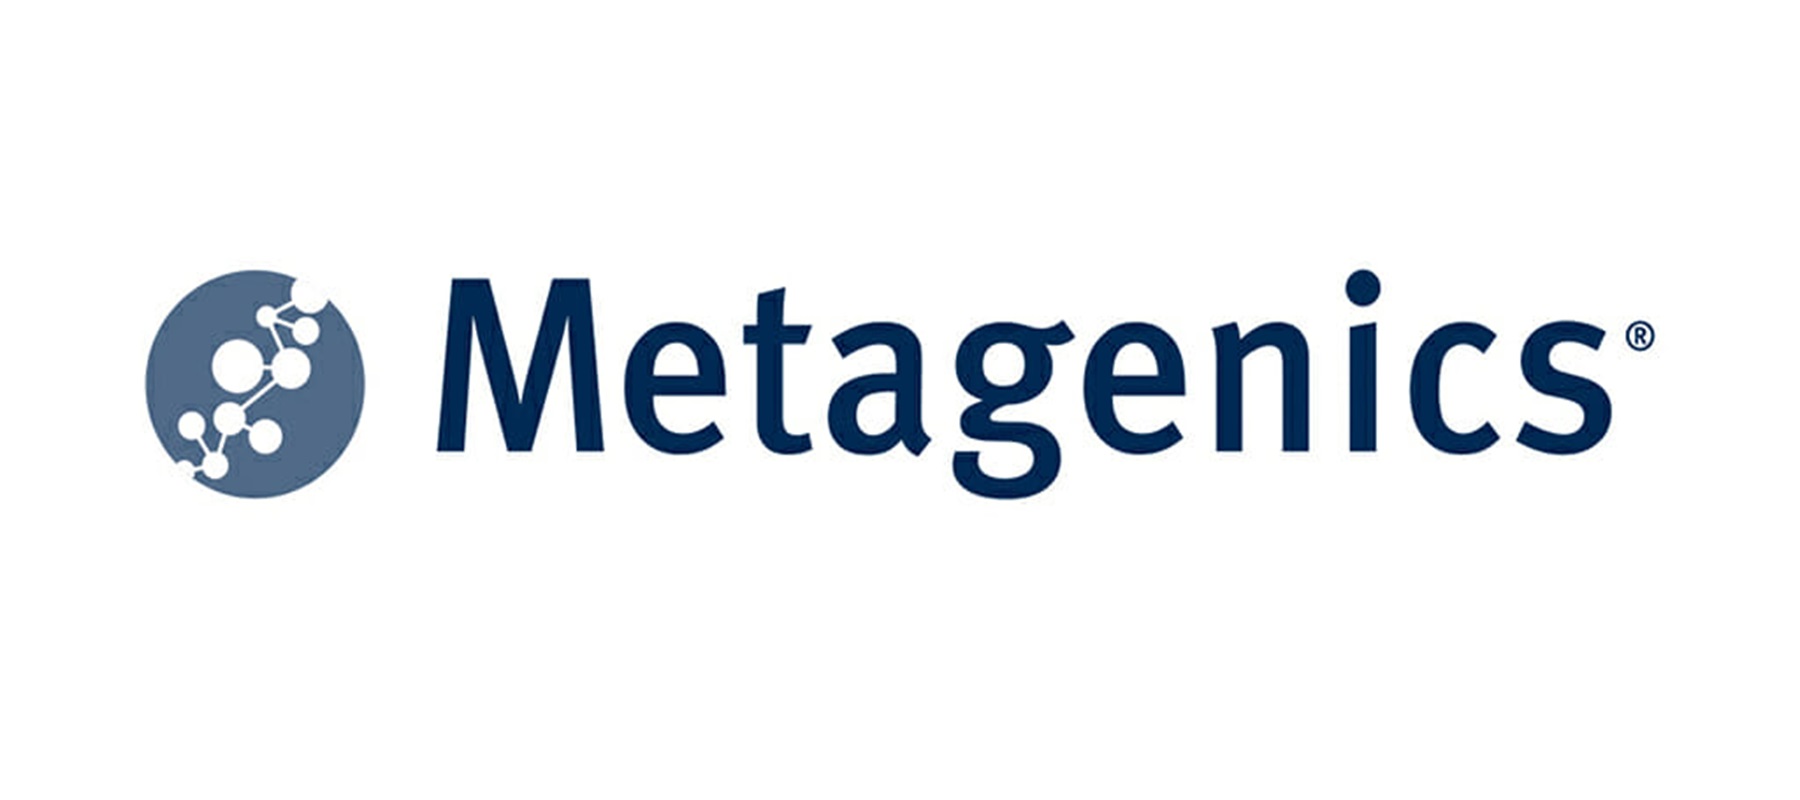 Metagenics selects Jellyfish to lead global media driving brand growth